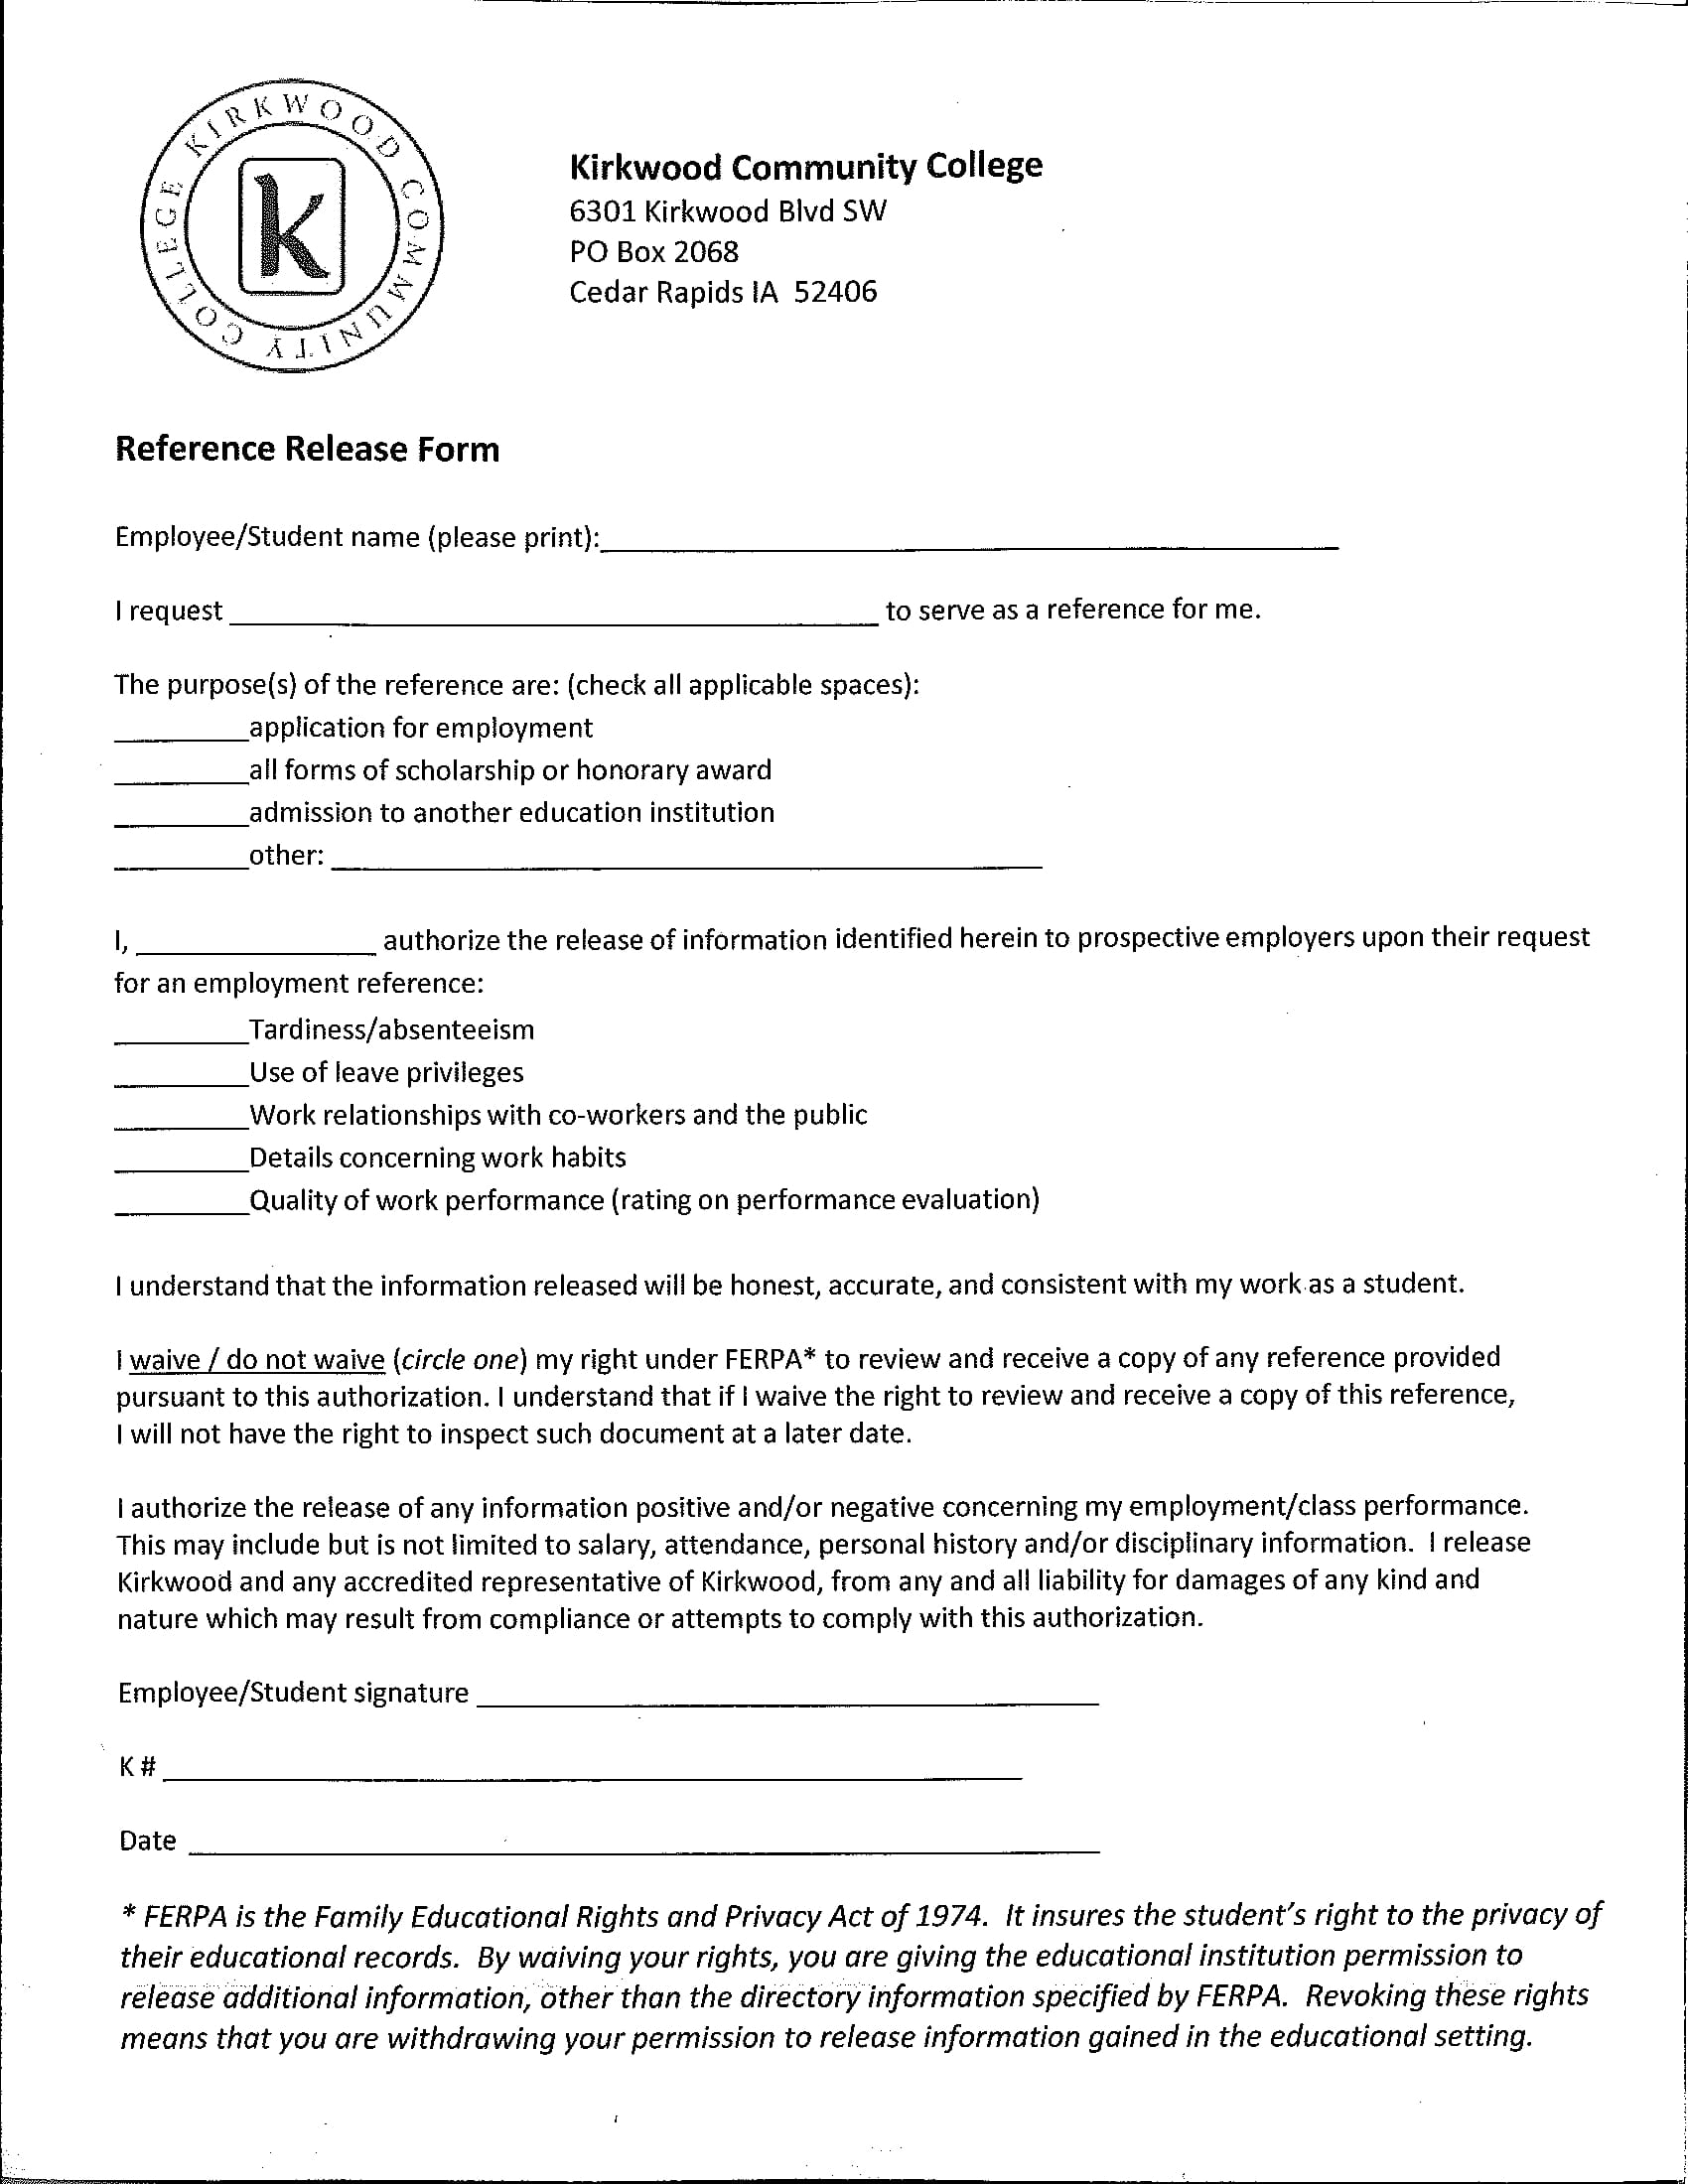 college employee reference release form 1